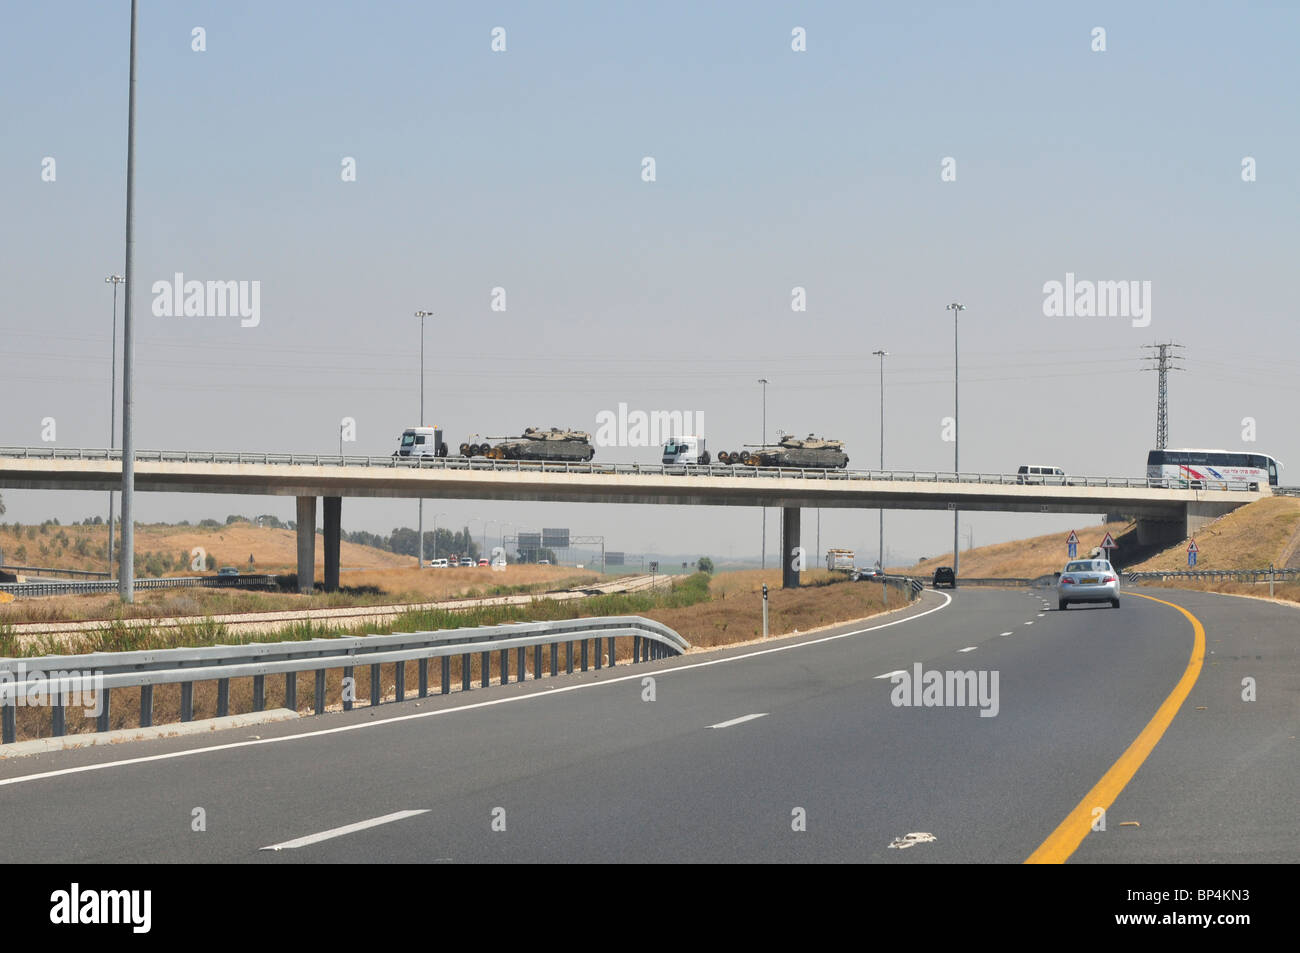 Israel, Tank carriers transporting Merkava tanks on a highway Stock Photo